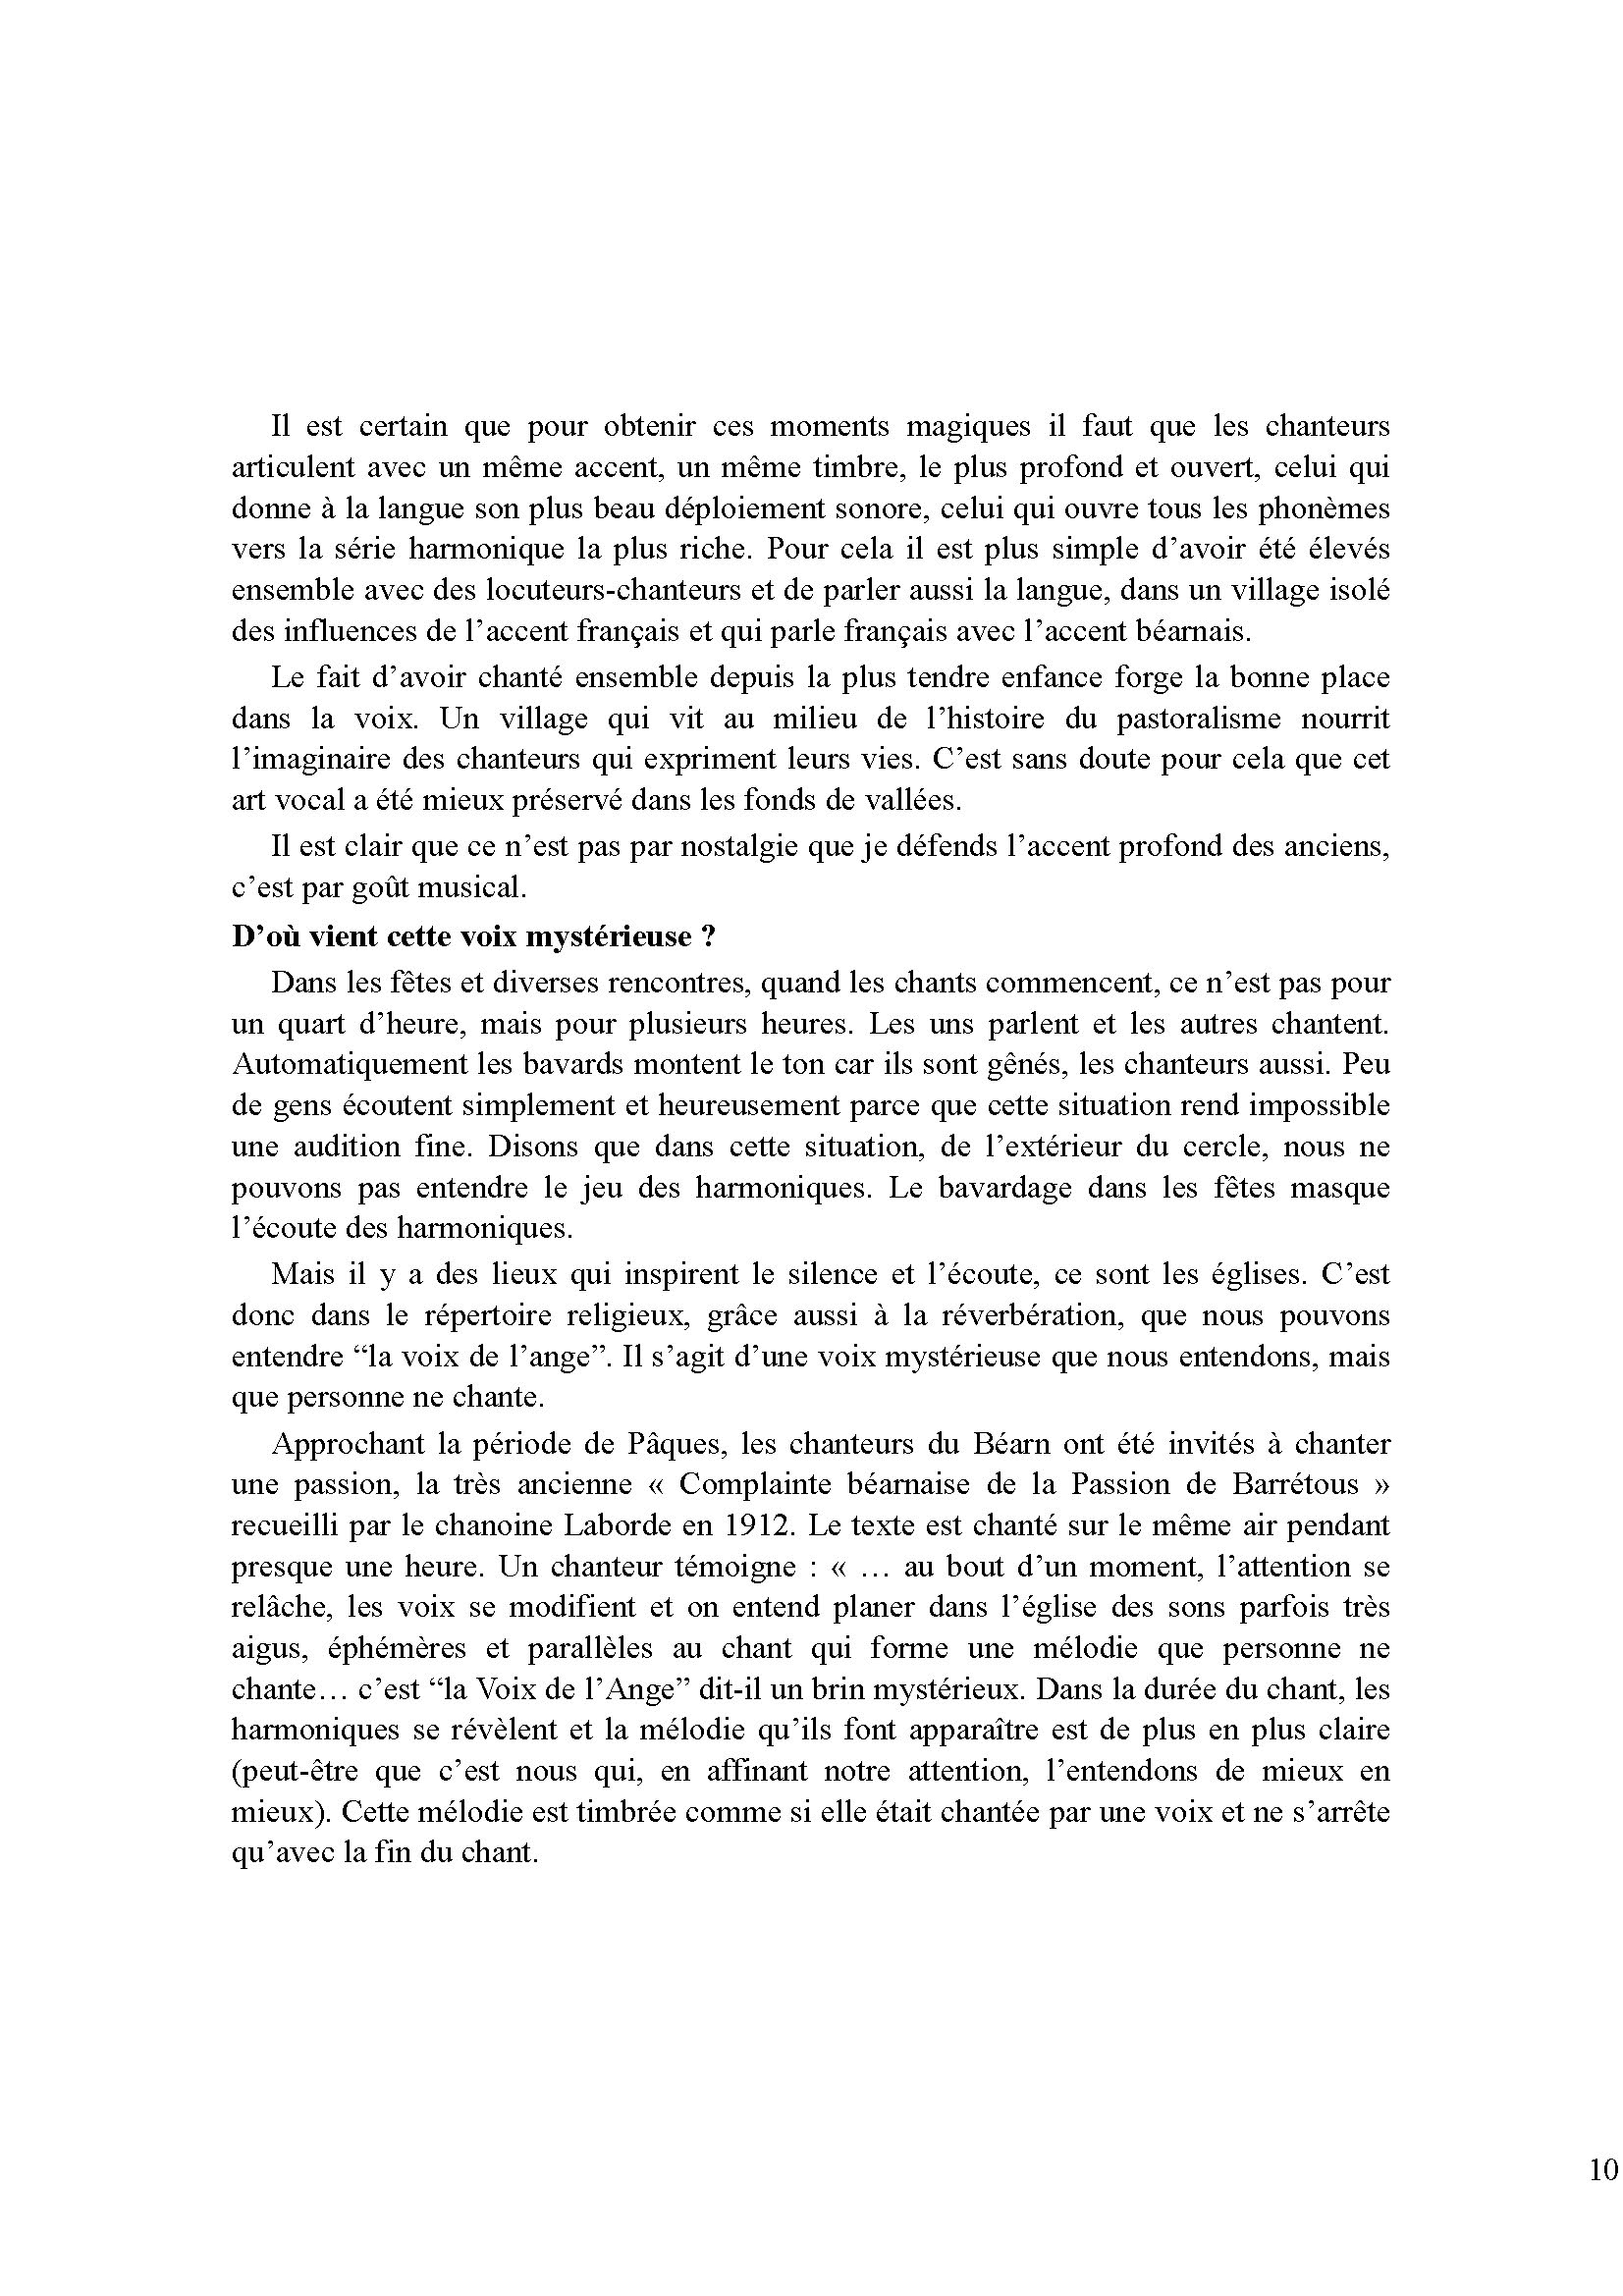 LAULHÈRE tradition vocale_Page_10